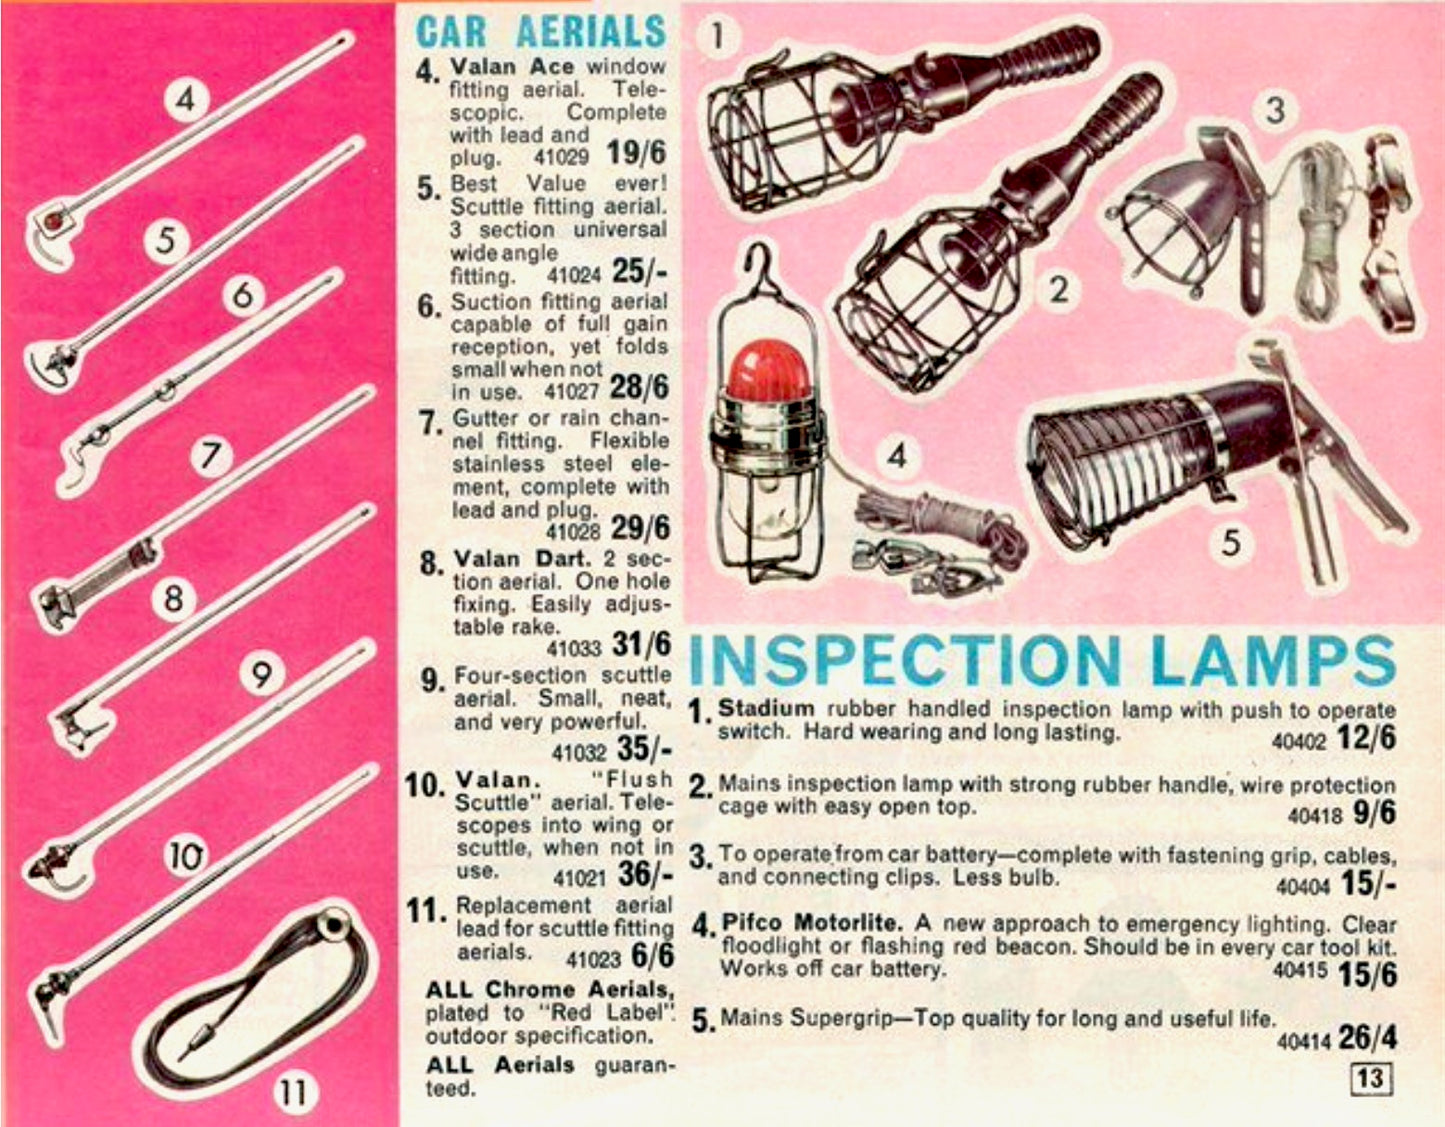 1965 Stadium Inspection Light With Mains Supply Lead